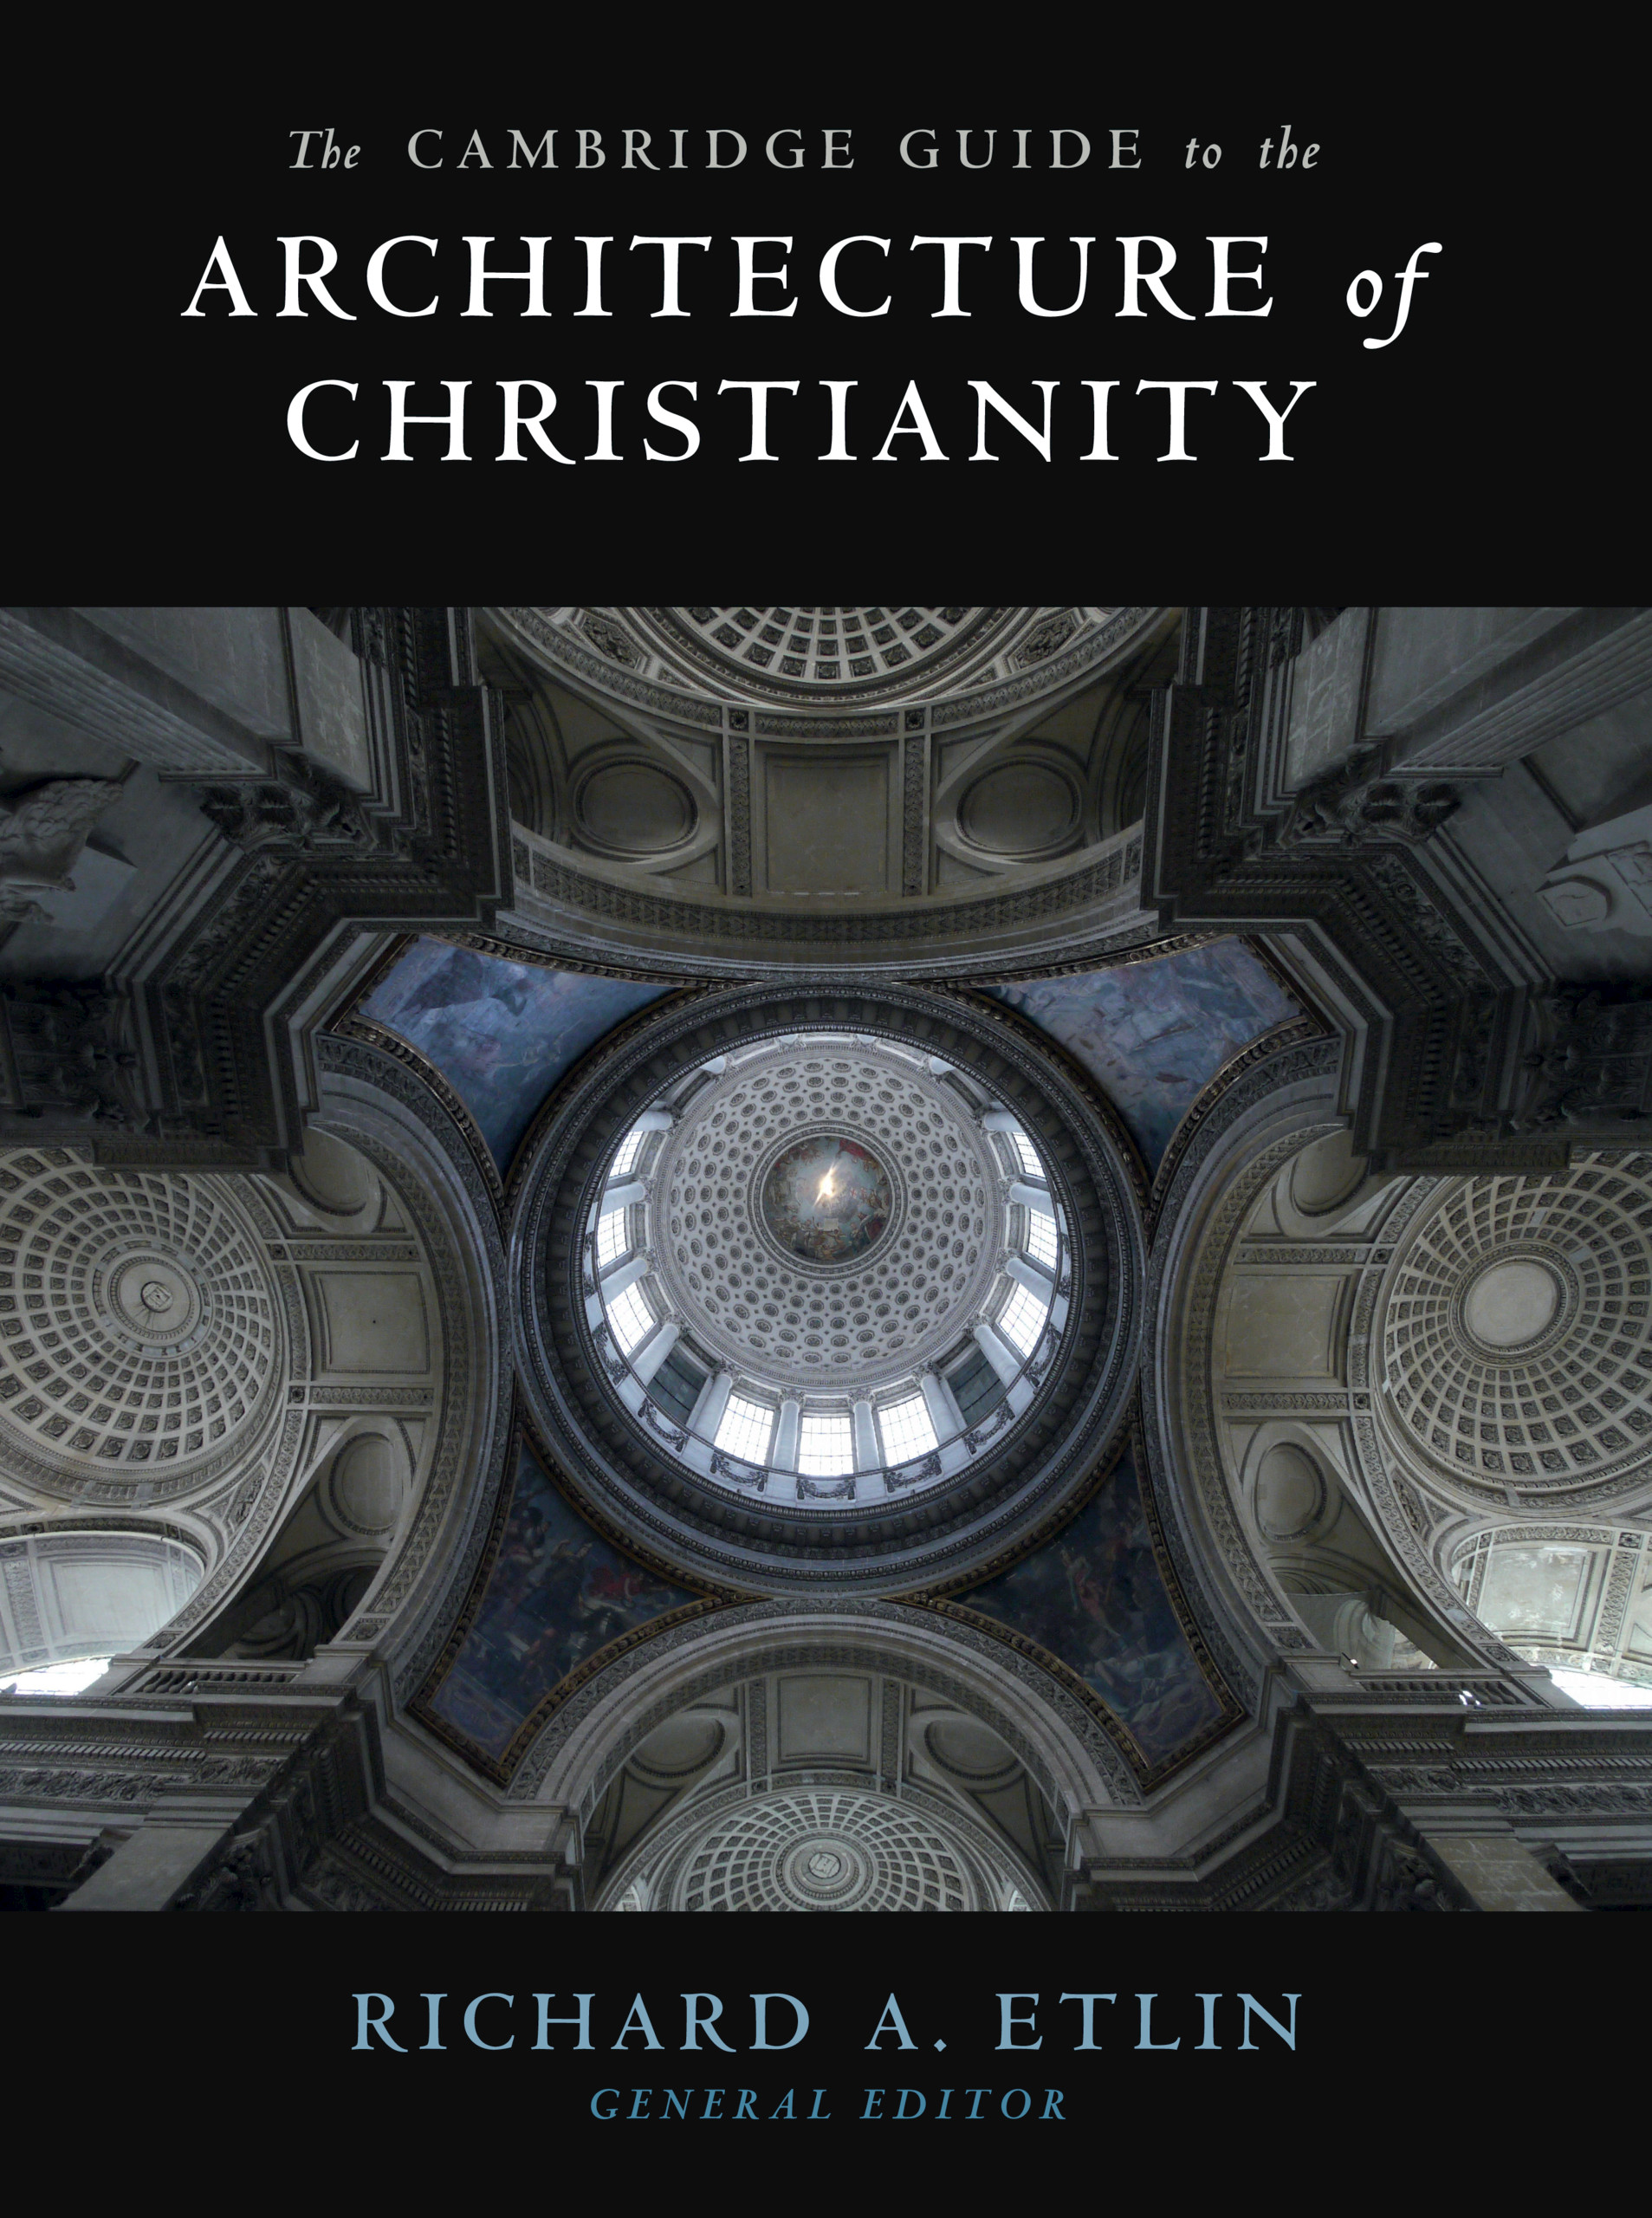 Many Architectures for Multiple Christianities